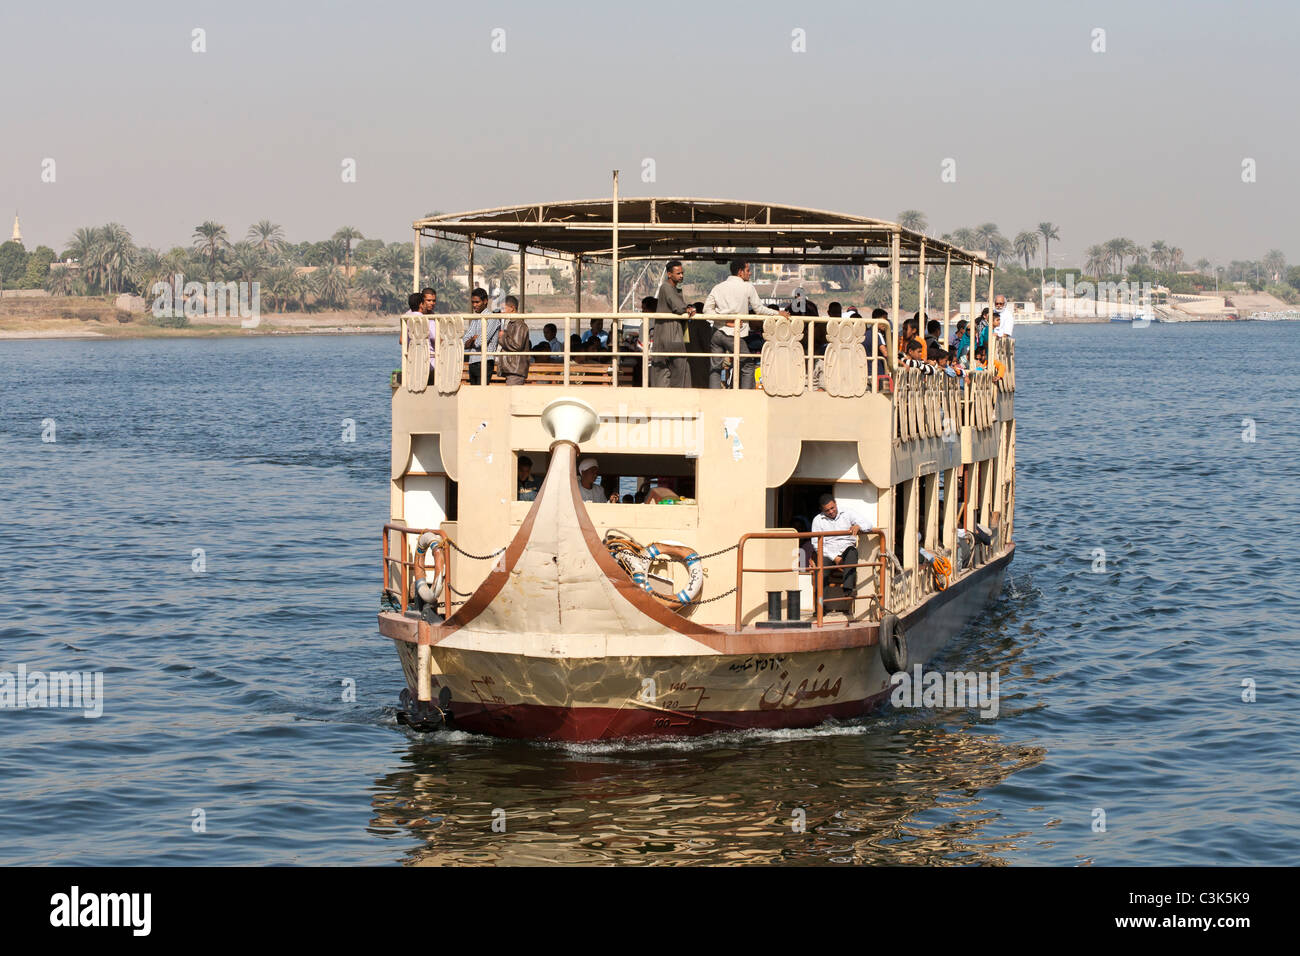 Luxor local ferry turning in the river for the East Bank palms in the background, Luxor, Egypt, Africa Stock Photo